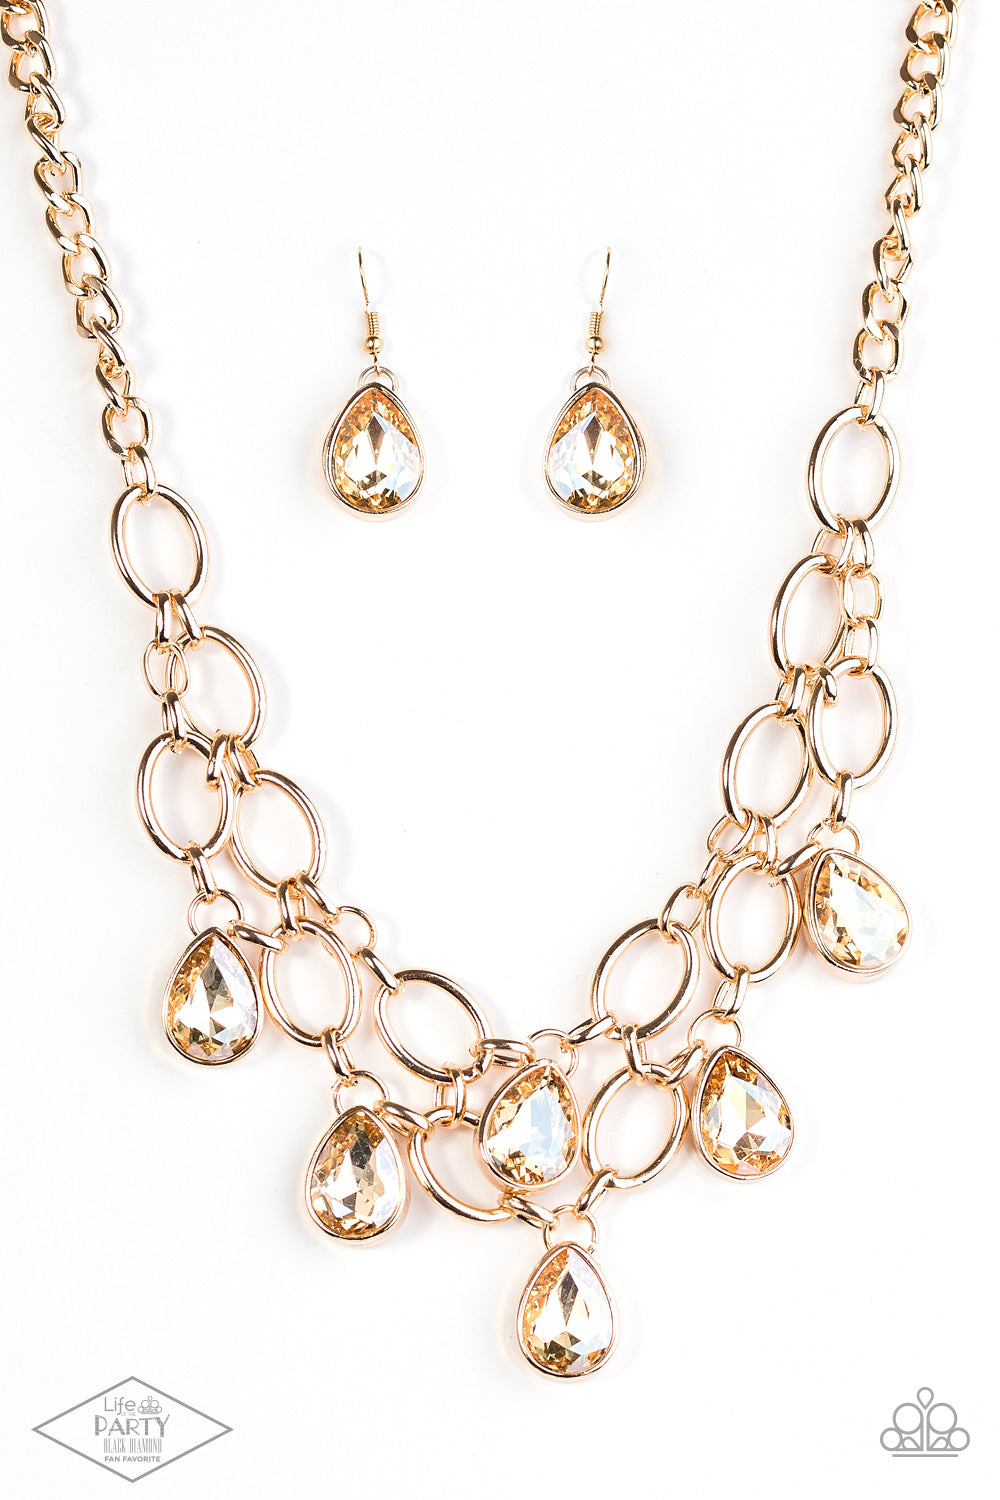 Show-Stopping Shimmer Gold Necklace - Paparazzi Accessories  Joined by dainty gold links, two rows of dramatic gold chain layer below the collar in a fierce fashion. Golden teardrops drip from the glistening layers, adding a timeless shimmer to the show-stopping piece. Features an adjustable clasp closure.  Includes one pair of matching earrings. This Fan Favorite is back in the spotlight at the request of our 2021 Life of the Party member with Black Diamond Access, Shayla S.